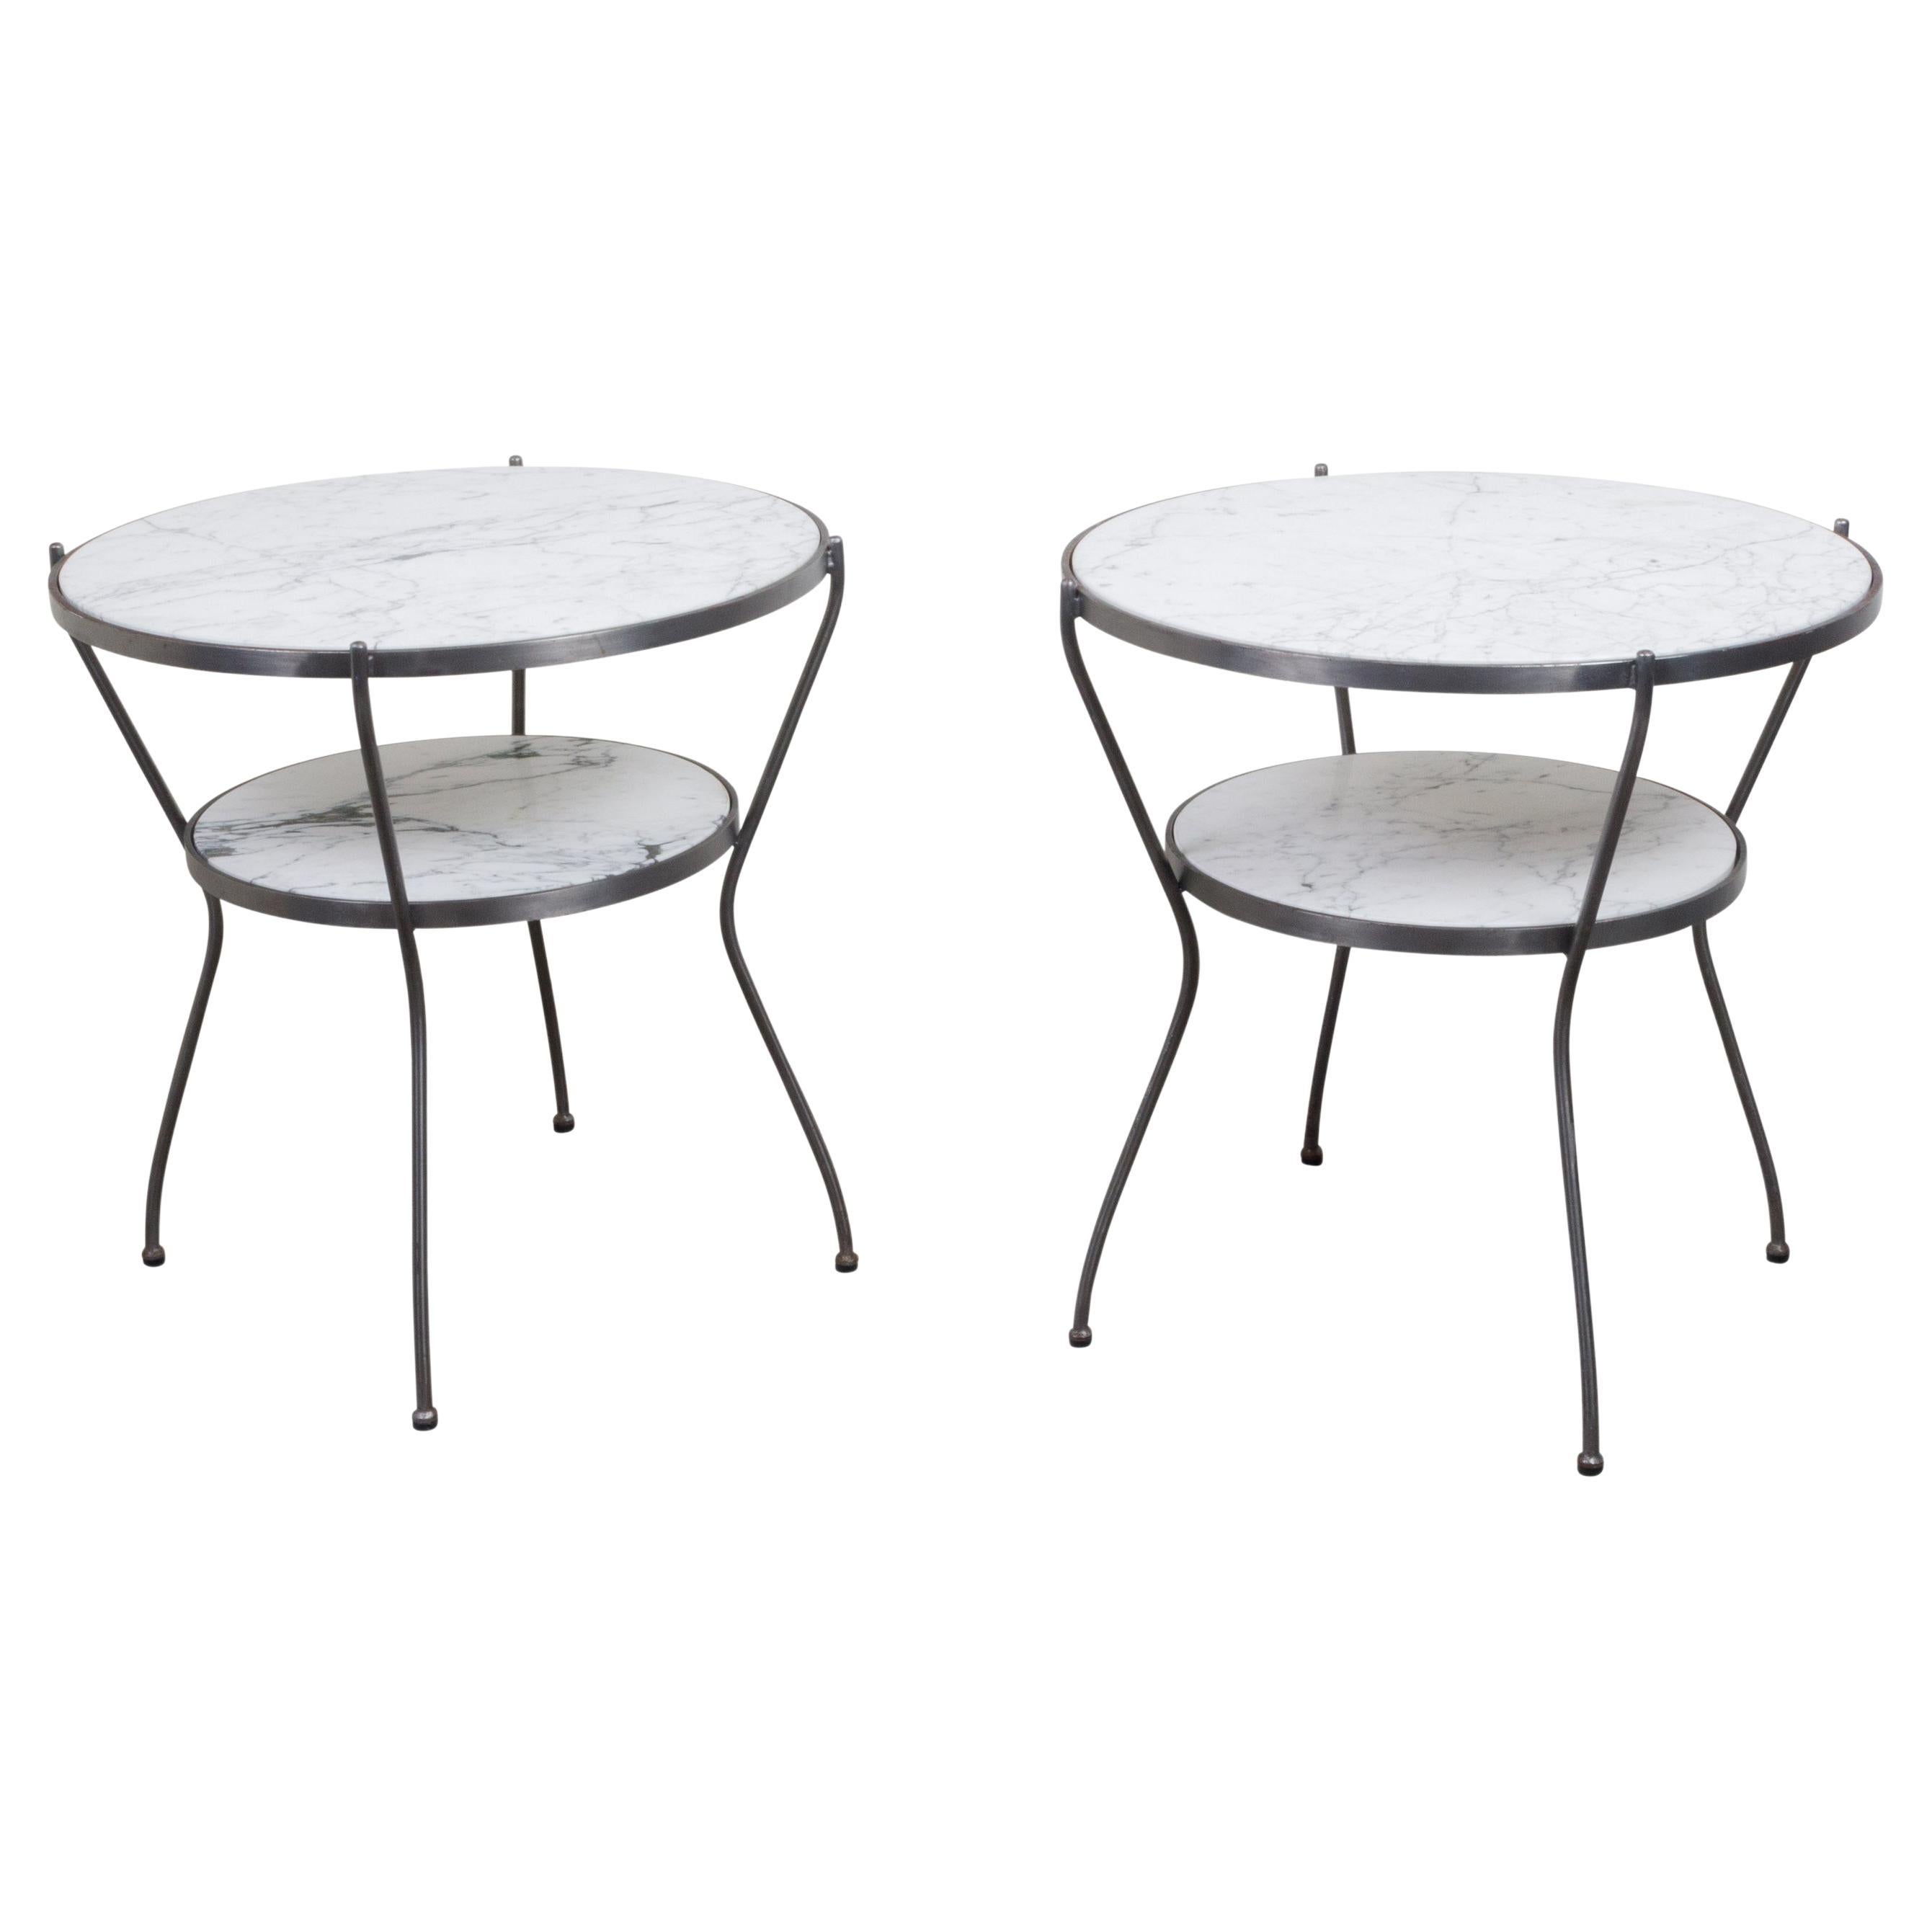 Pair of Italian Midcentury Steel Side Tables with Marble Tops and Shelves